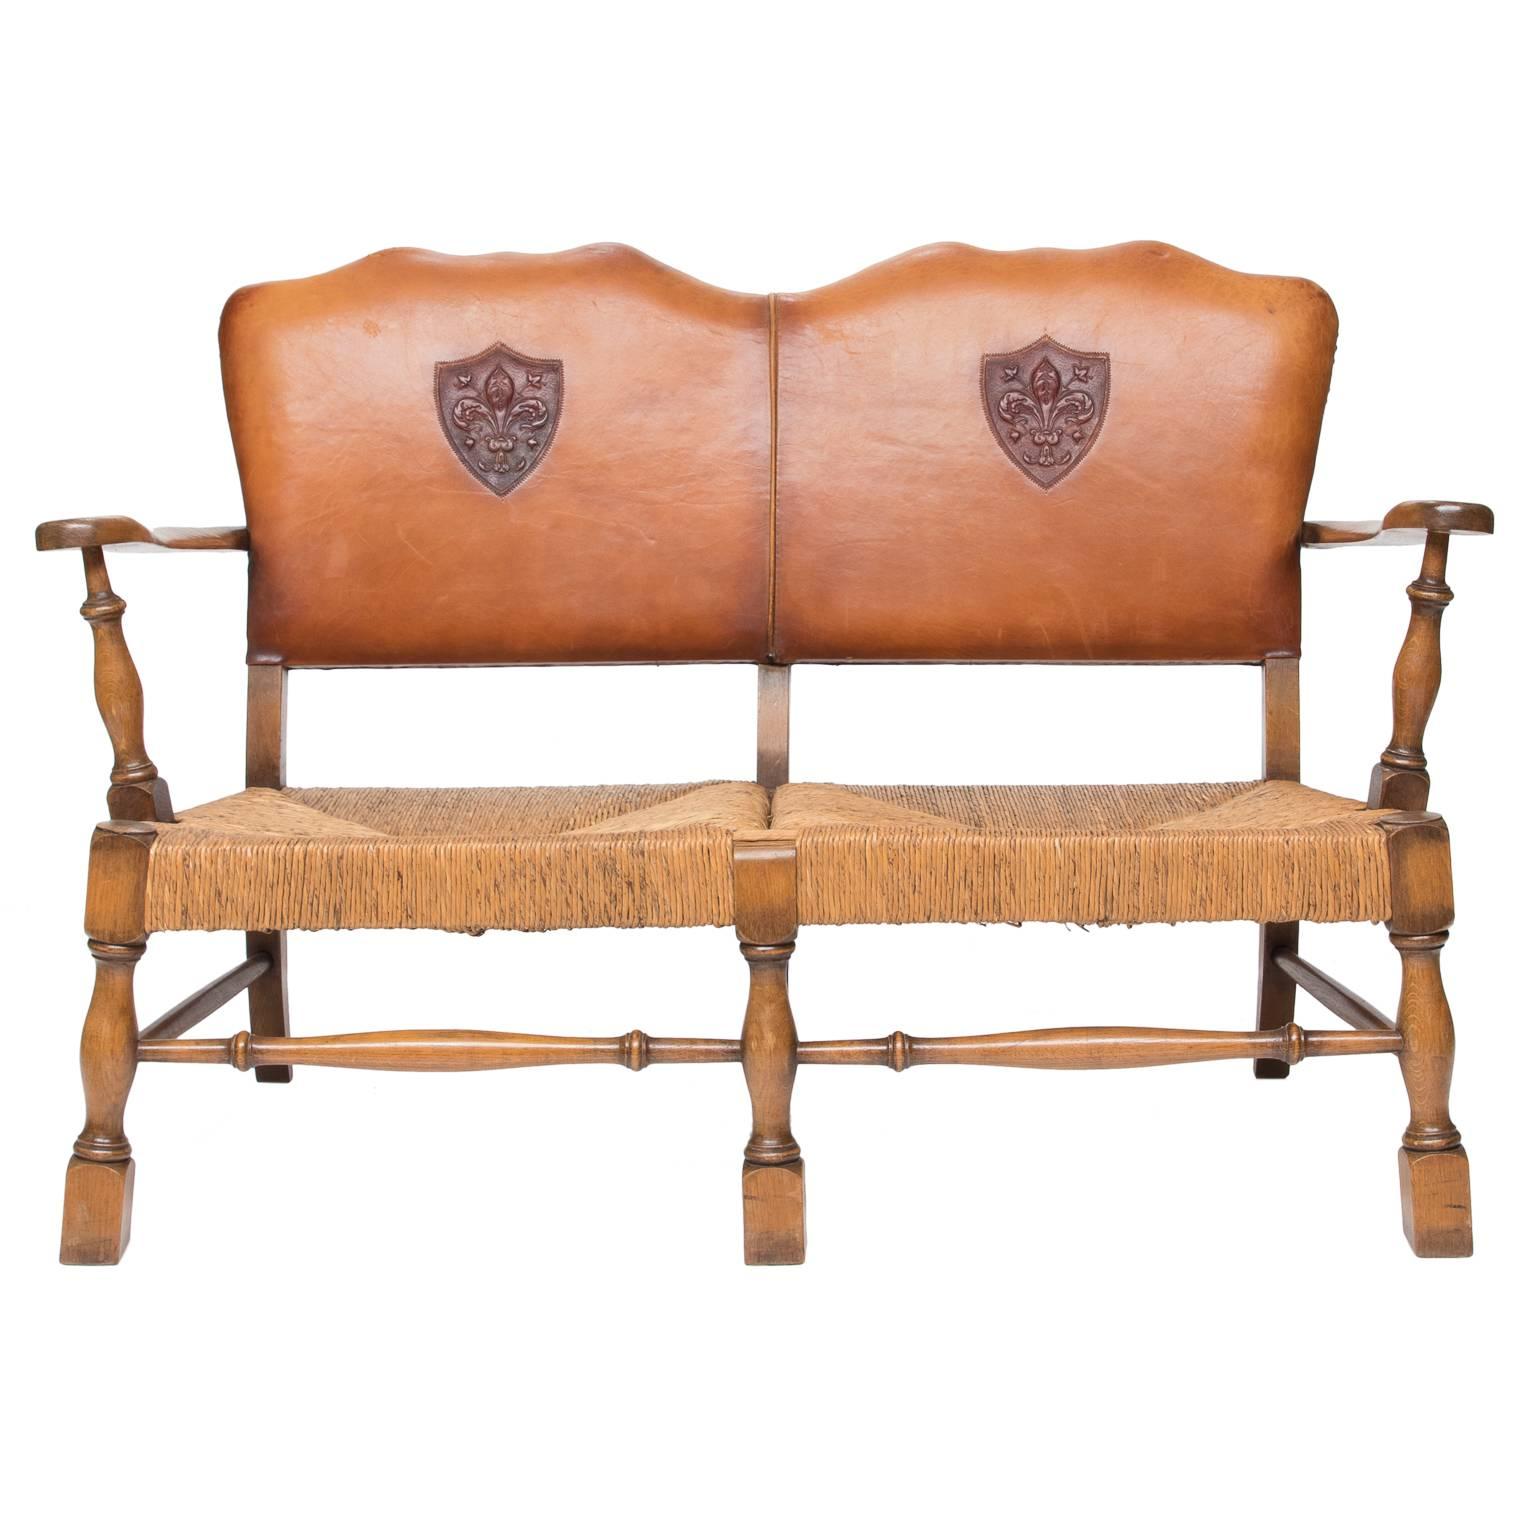 Vintage Arts & Crafts style French settee with two armchairs. This suite is made of French oak wood, rush seat (the rush is in very good condition) and embossed leather backs with shaped crest. There is enough space to have a cushion made for the